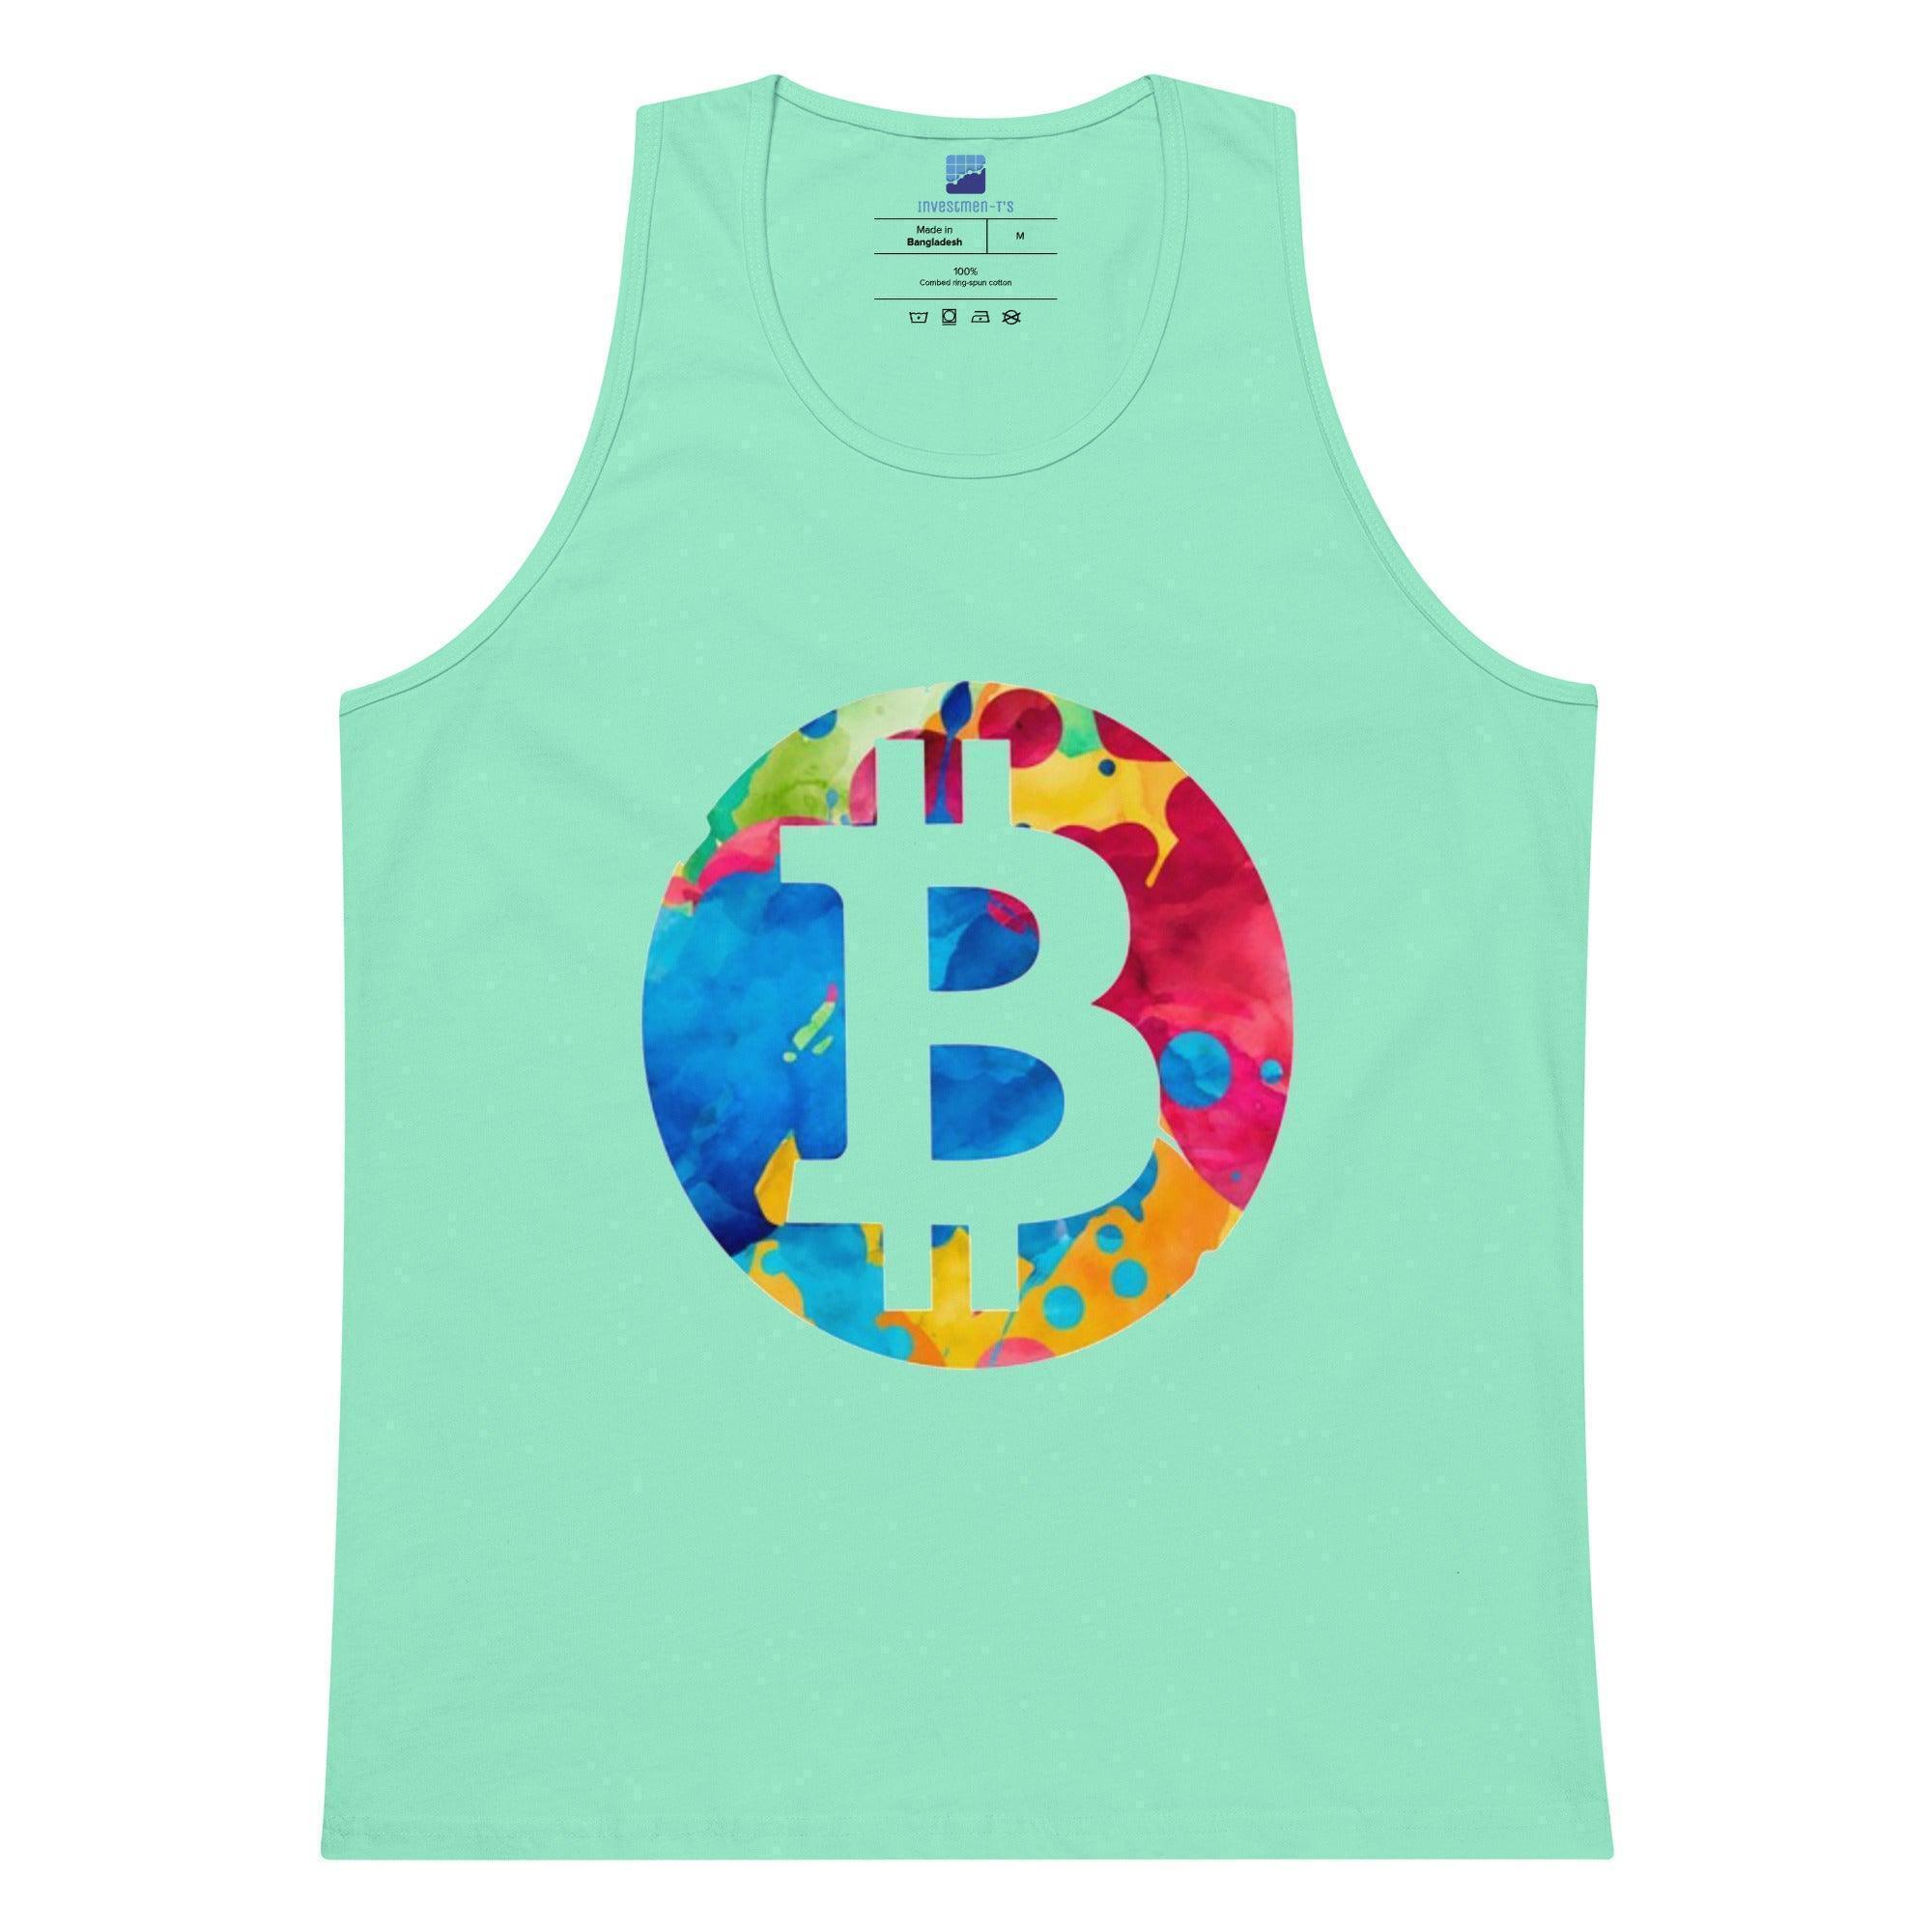 Colorful Bitcoin Tank Top - InvestmenTees